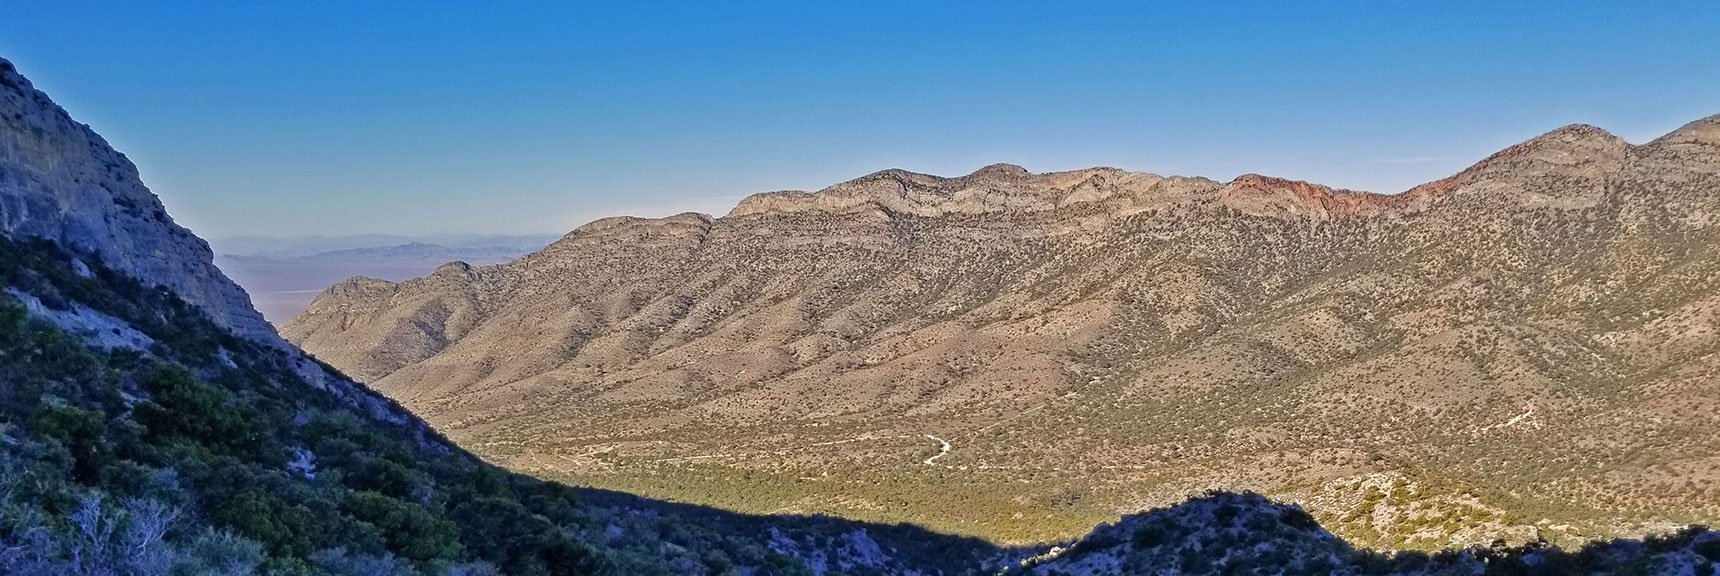 View Back to Potosi Springs Area from Cliff Base and Beginning of Northern Potosi Mt Cliffs Trail | Potosi Mountain Northern Cliffs Trail | Spring Mountains, Nevada